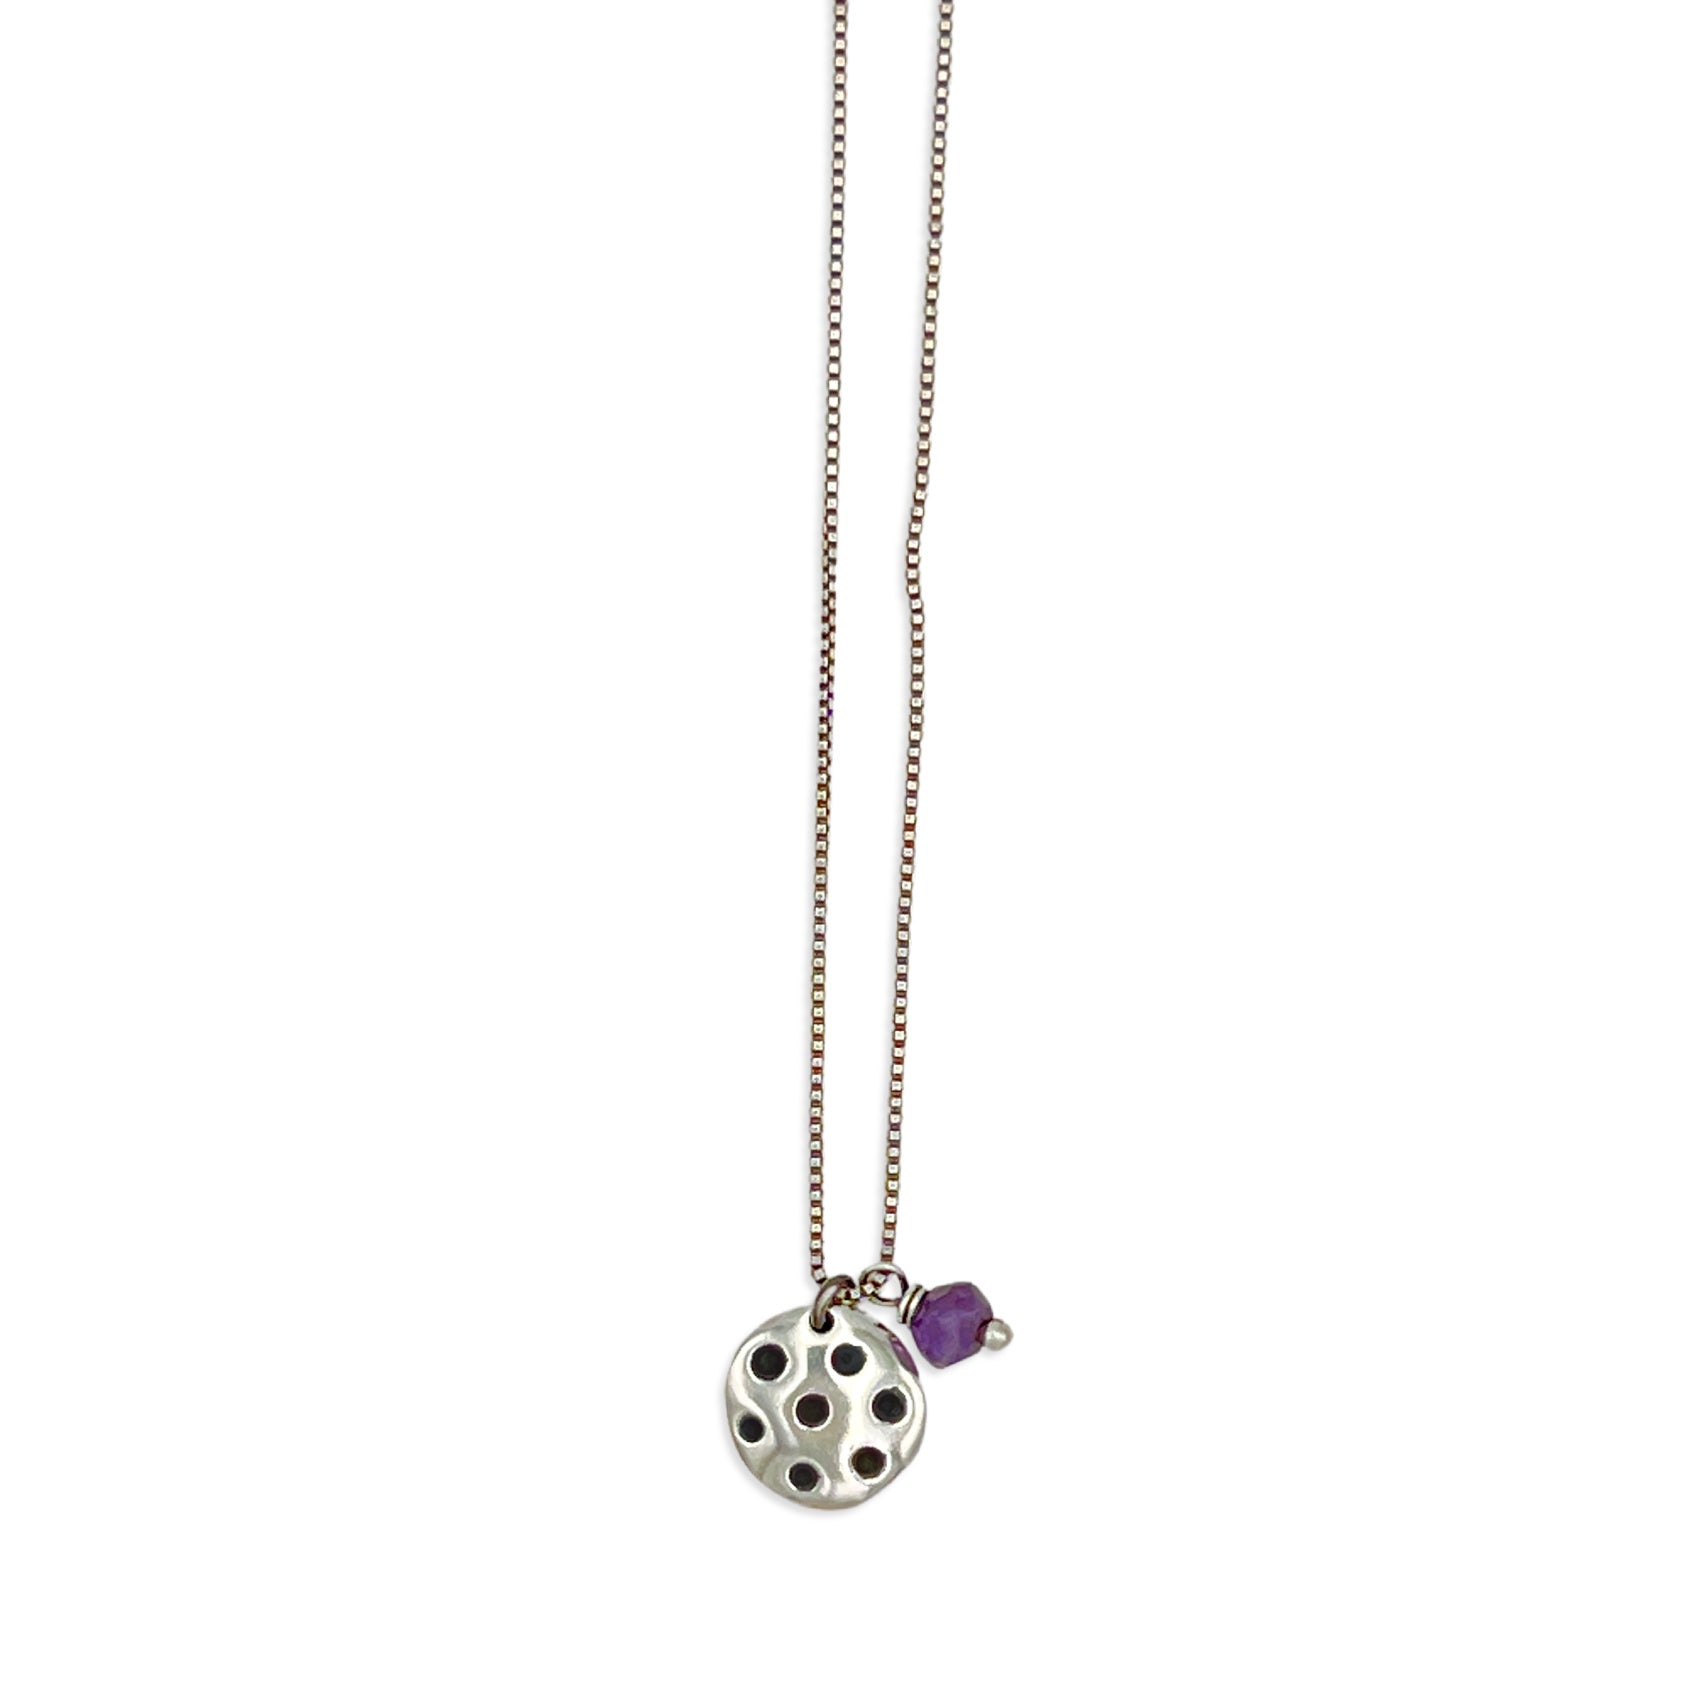 Pickle Ball Small Charm Necklace with Amethyst